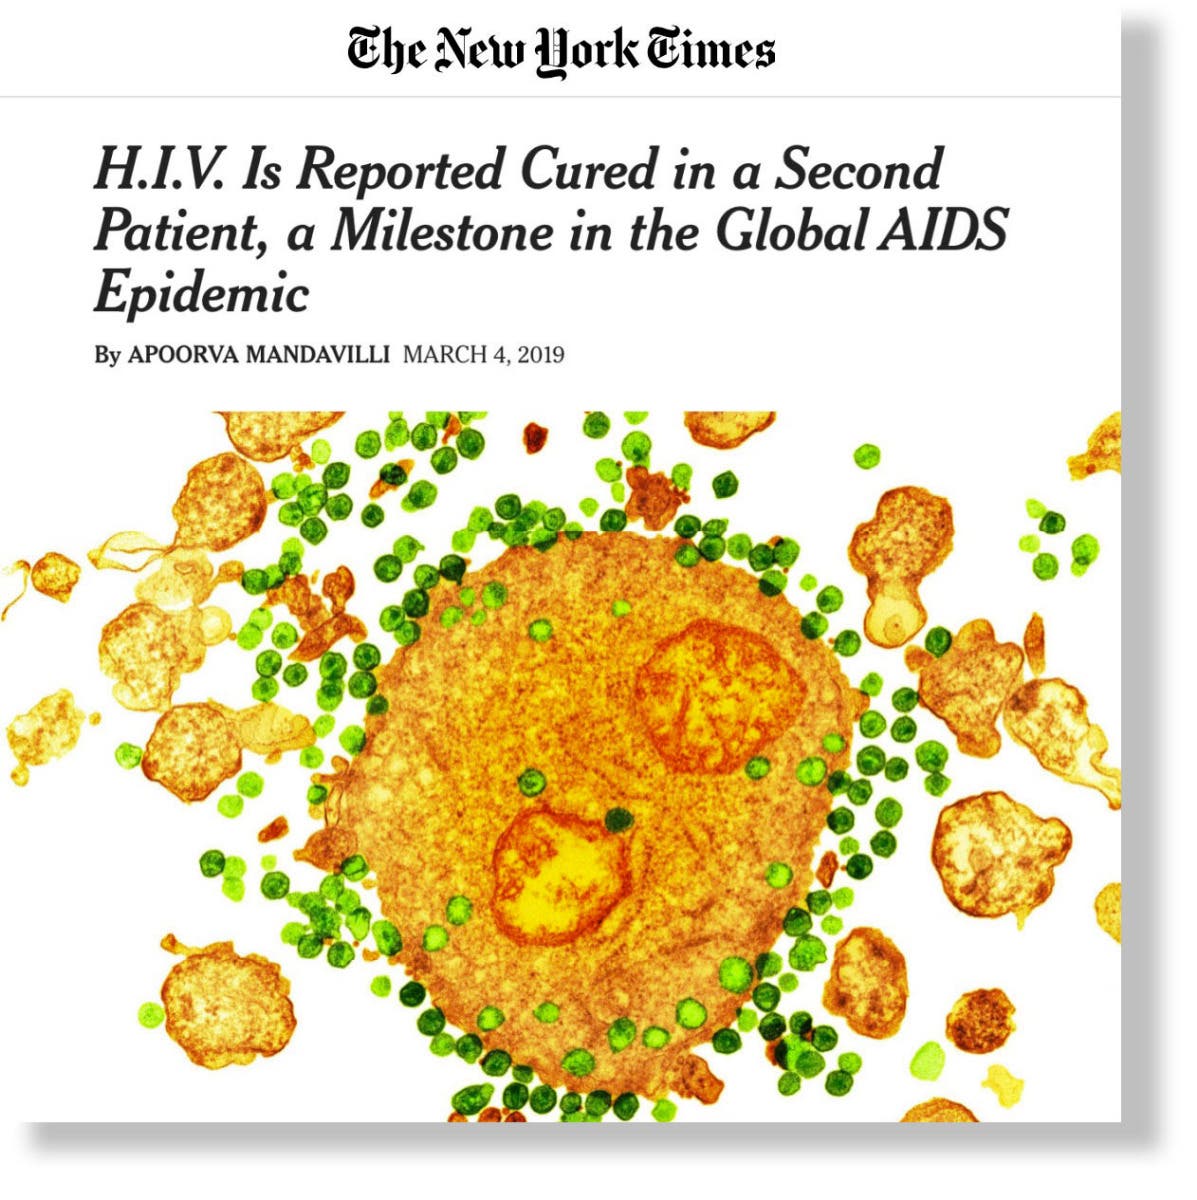 H.I.V. Is Reported Cured in a Second Patient, a Milestone in the Global AIDS Epidemic - NY Times